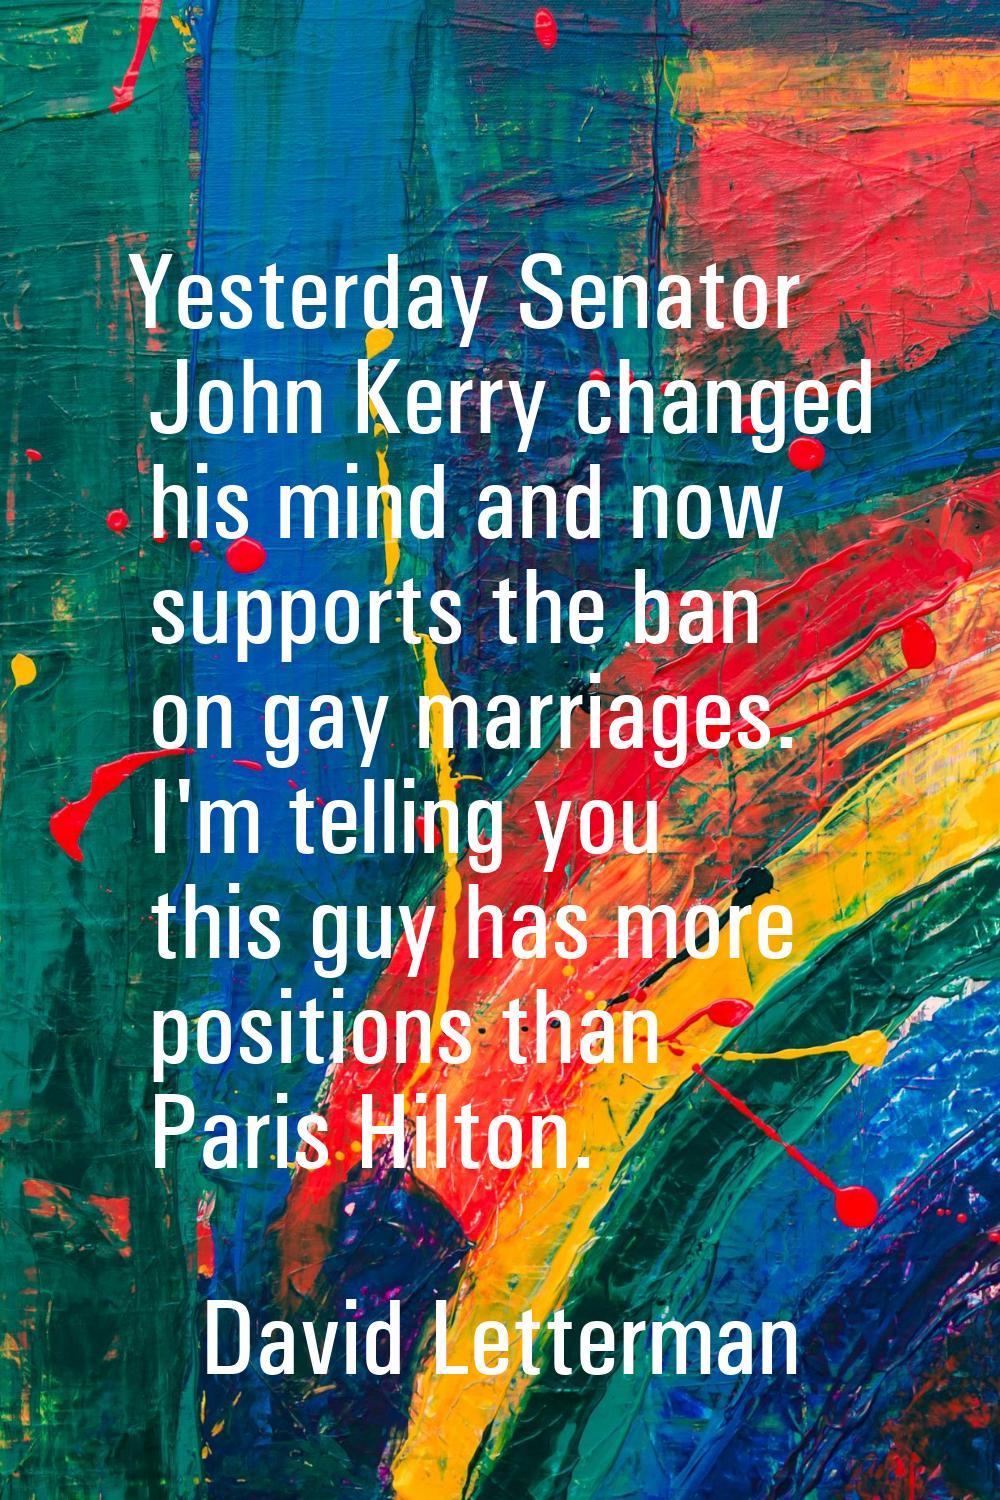 Yesterday Senator John Kerry changed his mind and now supports the ban on gay marriages. I'm tellin